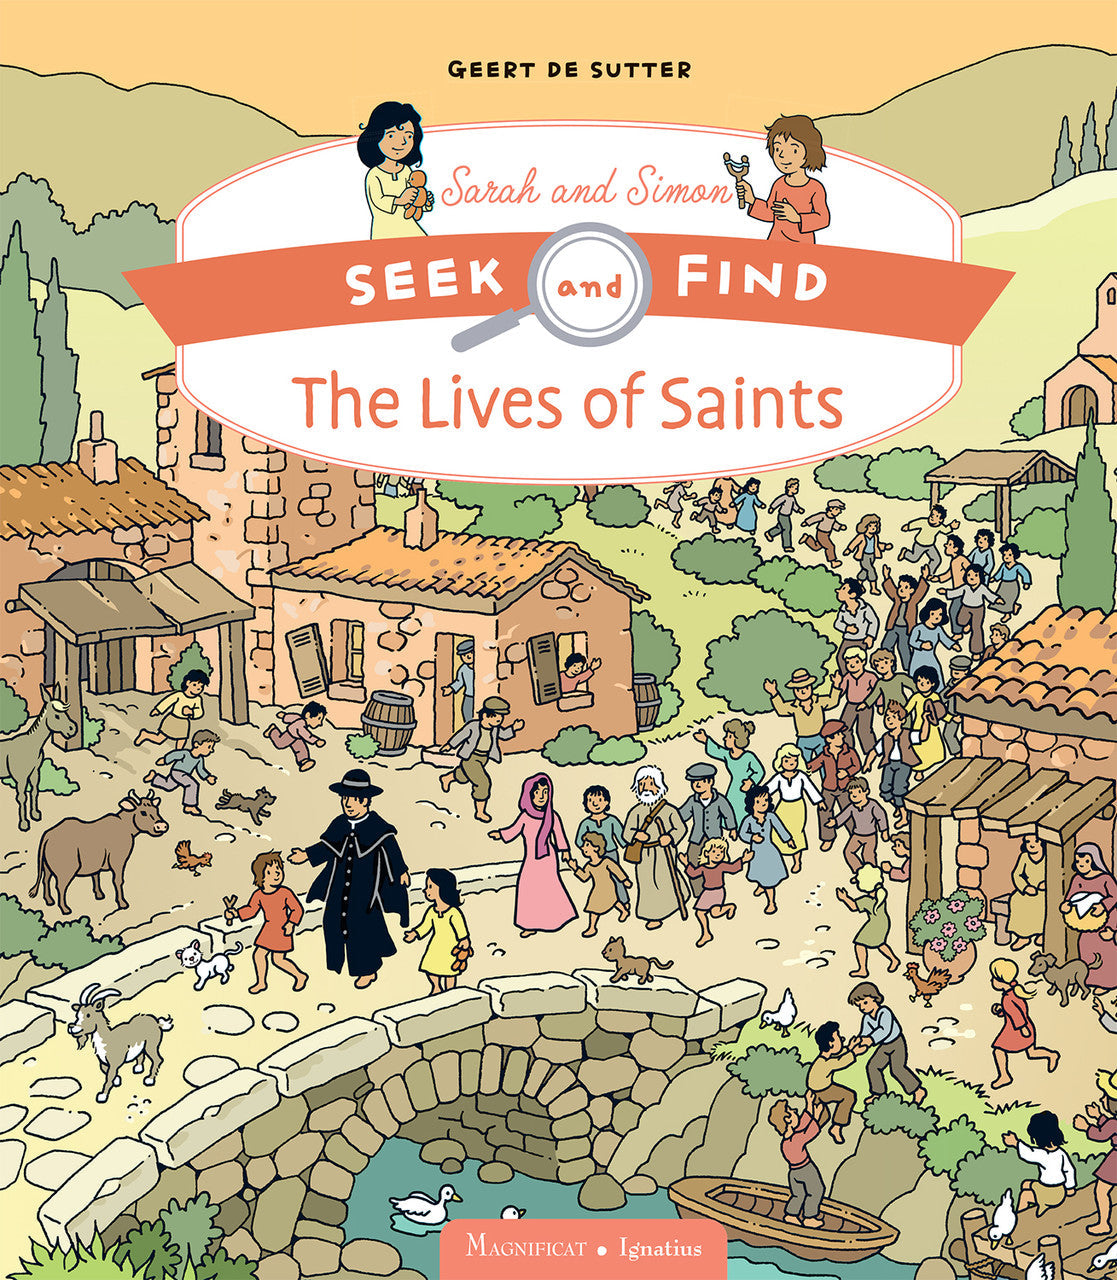 FREE GIFT | The Lives of Saints Seek and Find